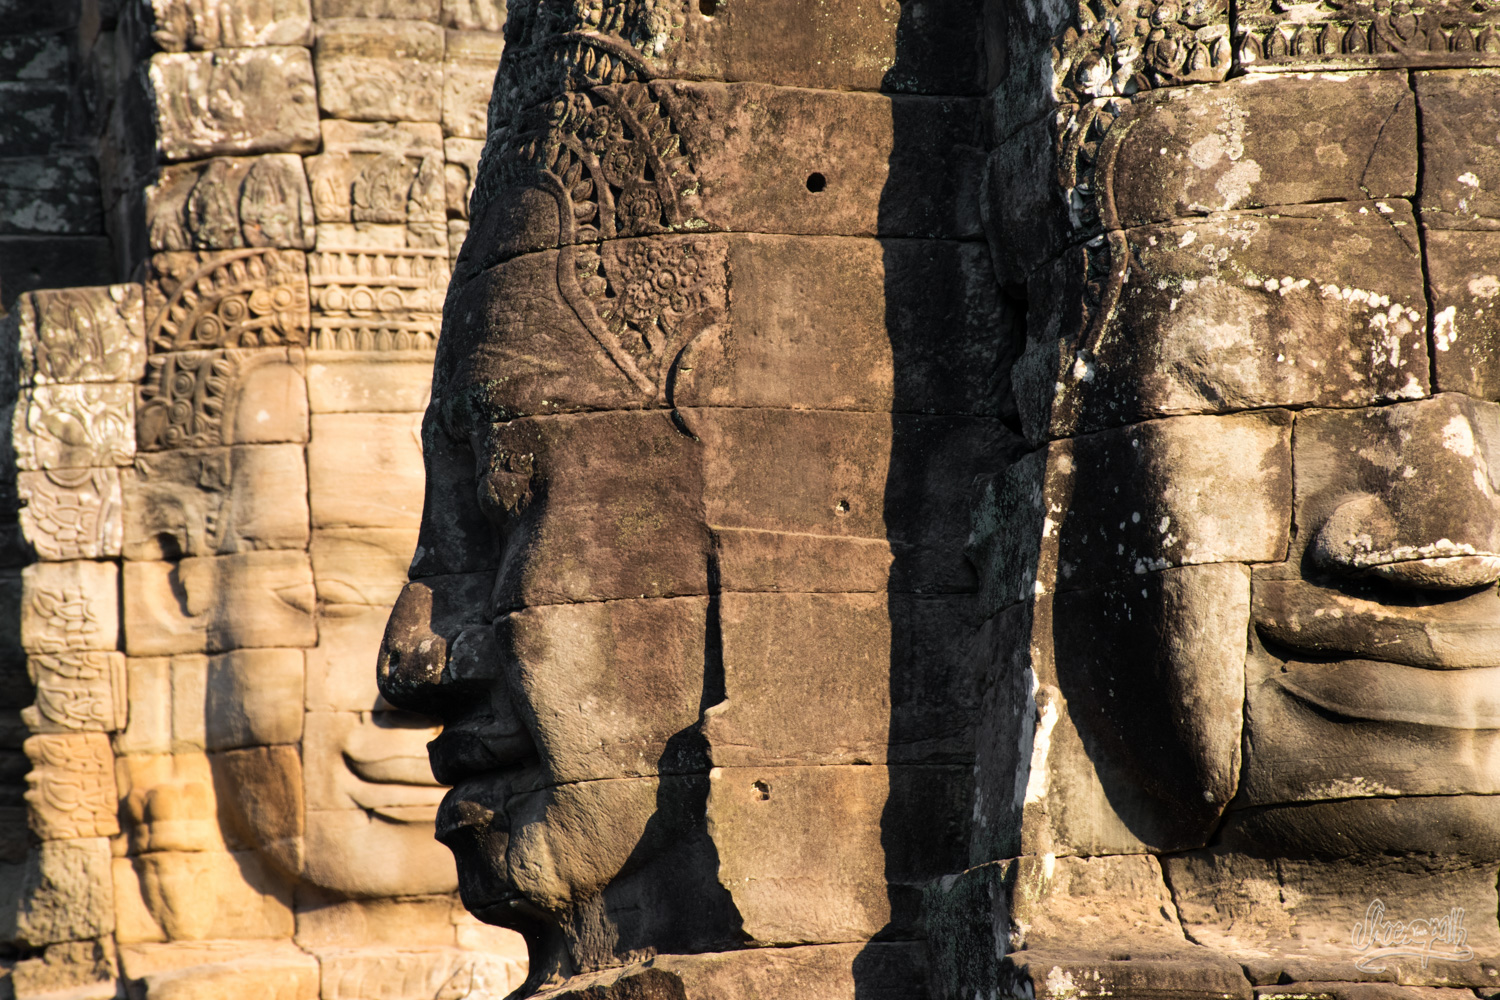 The kiss ! When the statues of Bayon temple kiss each other...